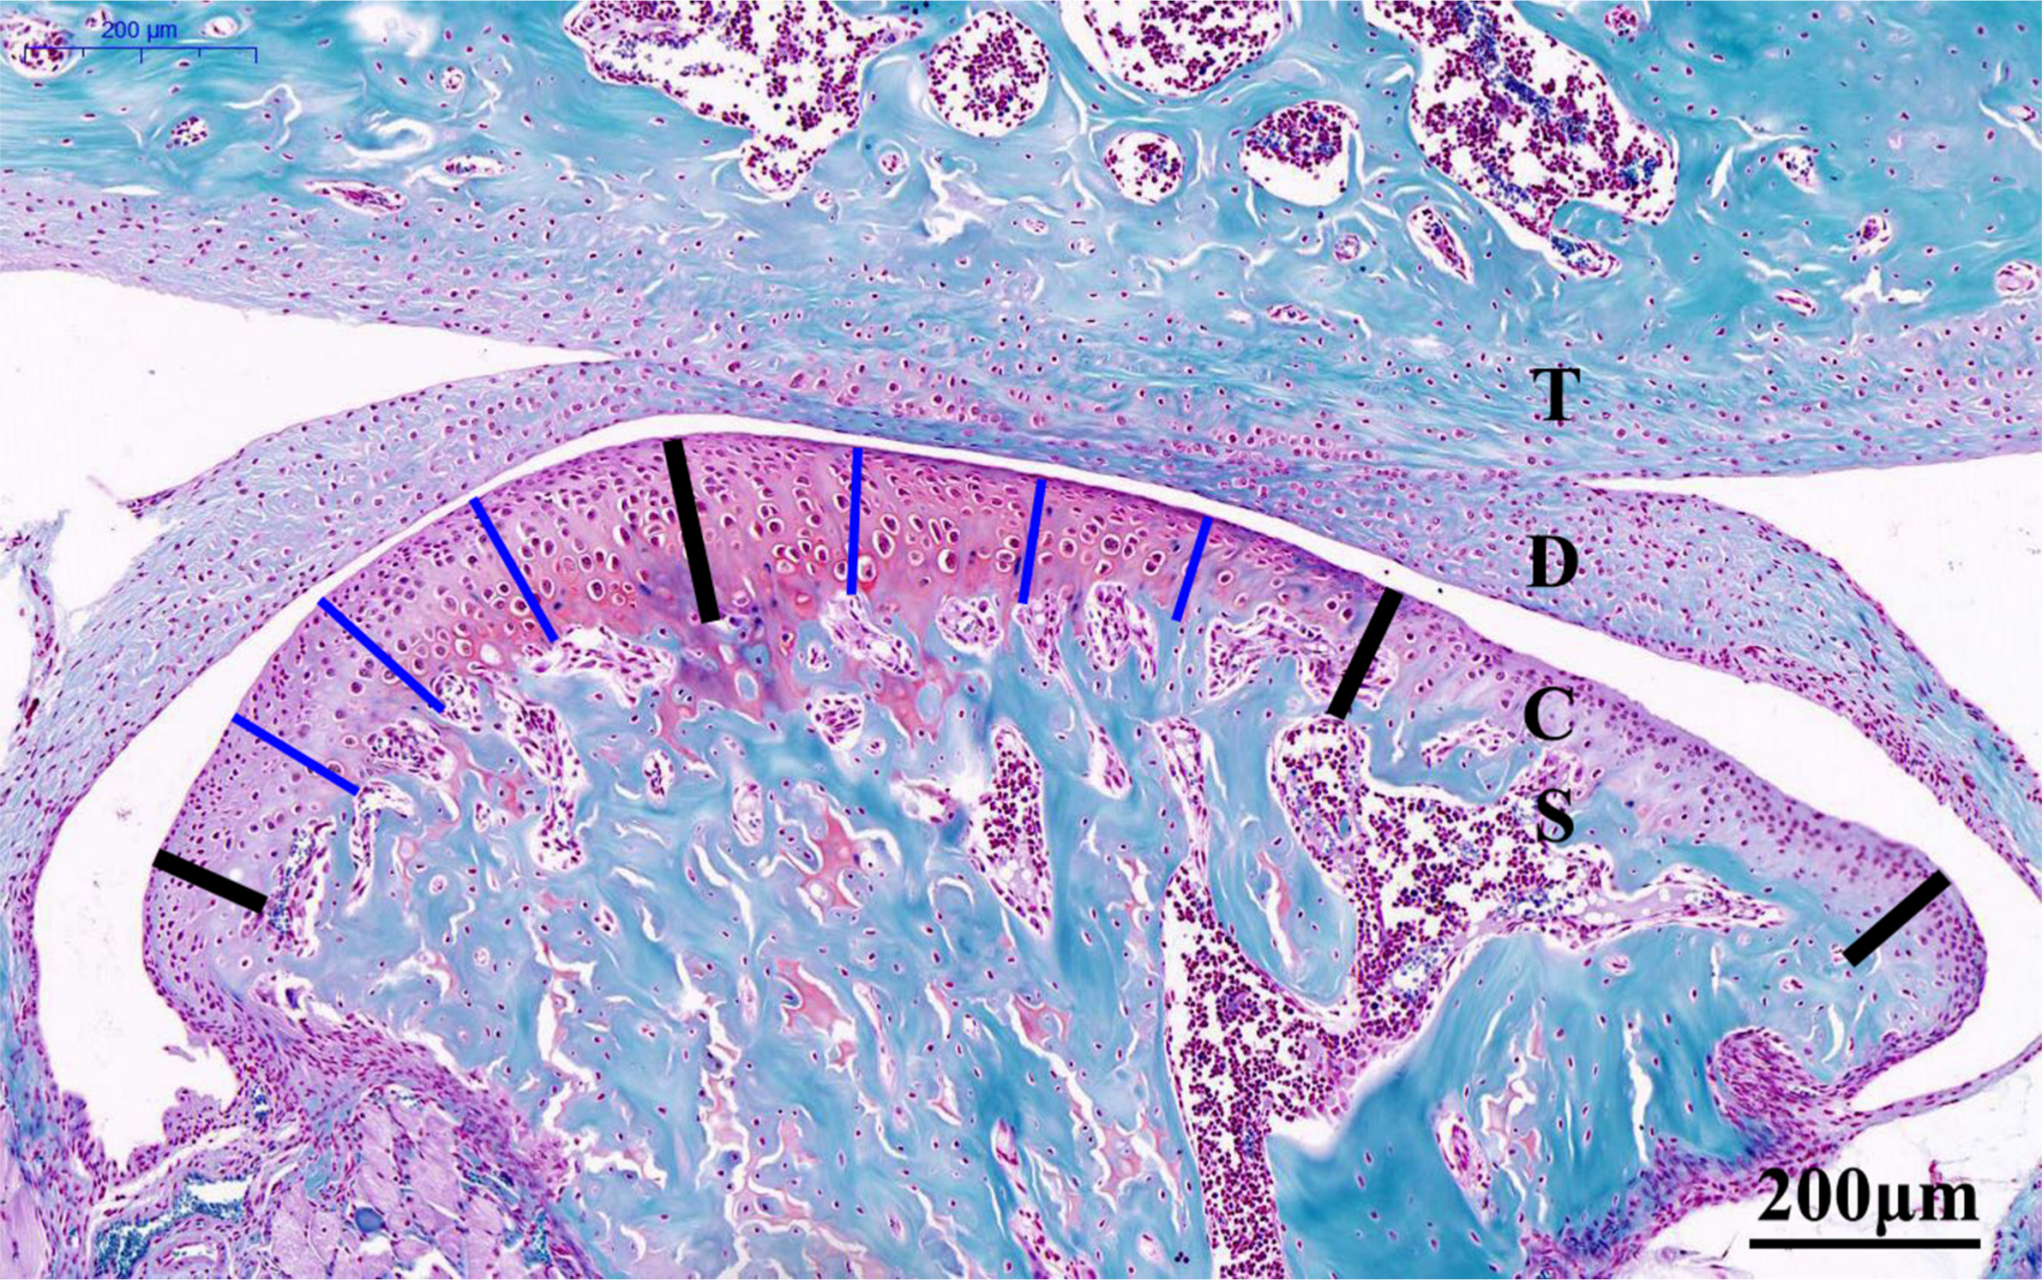 Fig. 1 
            Representative Safranin O-stained central sagittal sections (10× magnification) of the temporomandibular joint (TMJ) from six-week-old control mice (20×). The cartilage was divided into three regions, as denoted by the four bold black lines. The thickness of the central or posterior third of the cartilage was calculated as the mean length of the three thin blue lines in the corresponding thirds. The total cartilage thickness of the TMJ was calculated as the mean of the values for the central and posterior thirds. Scale bar: 200 mm. C, condylar cartilage; D, articular disc; S, subchondral bone; T: temporal bone.
          